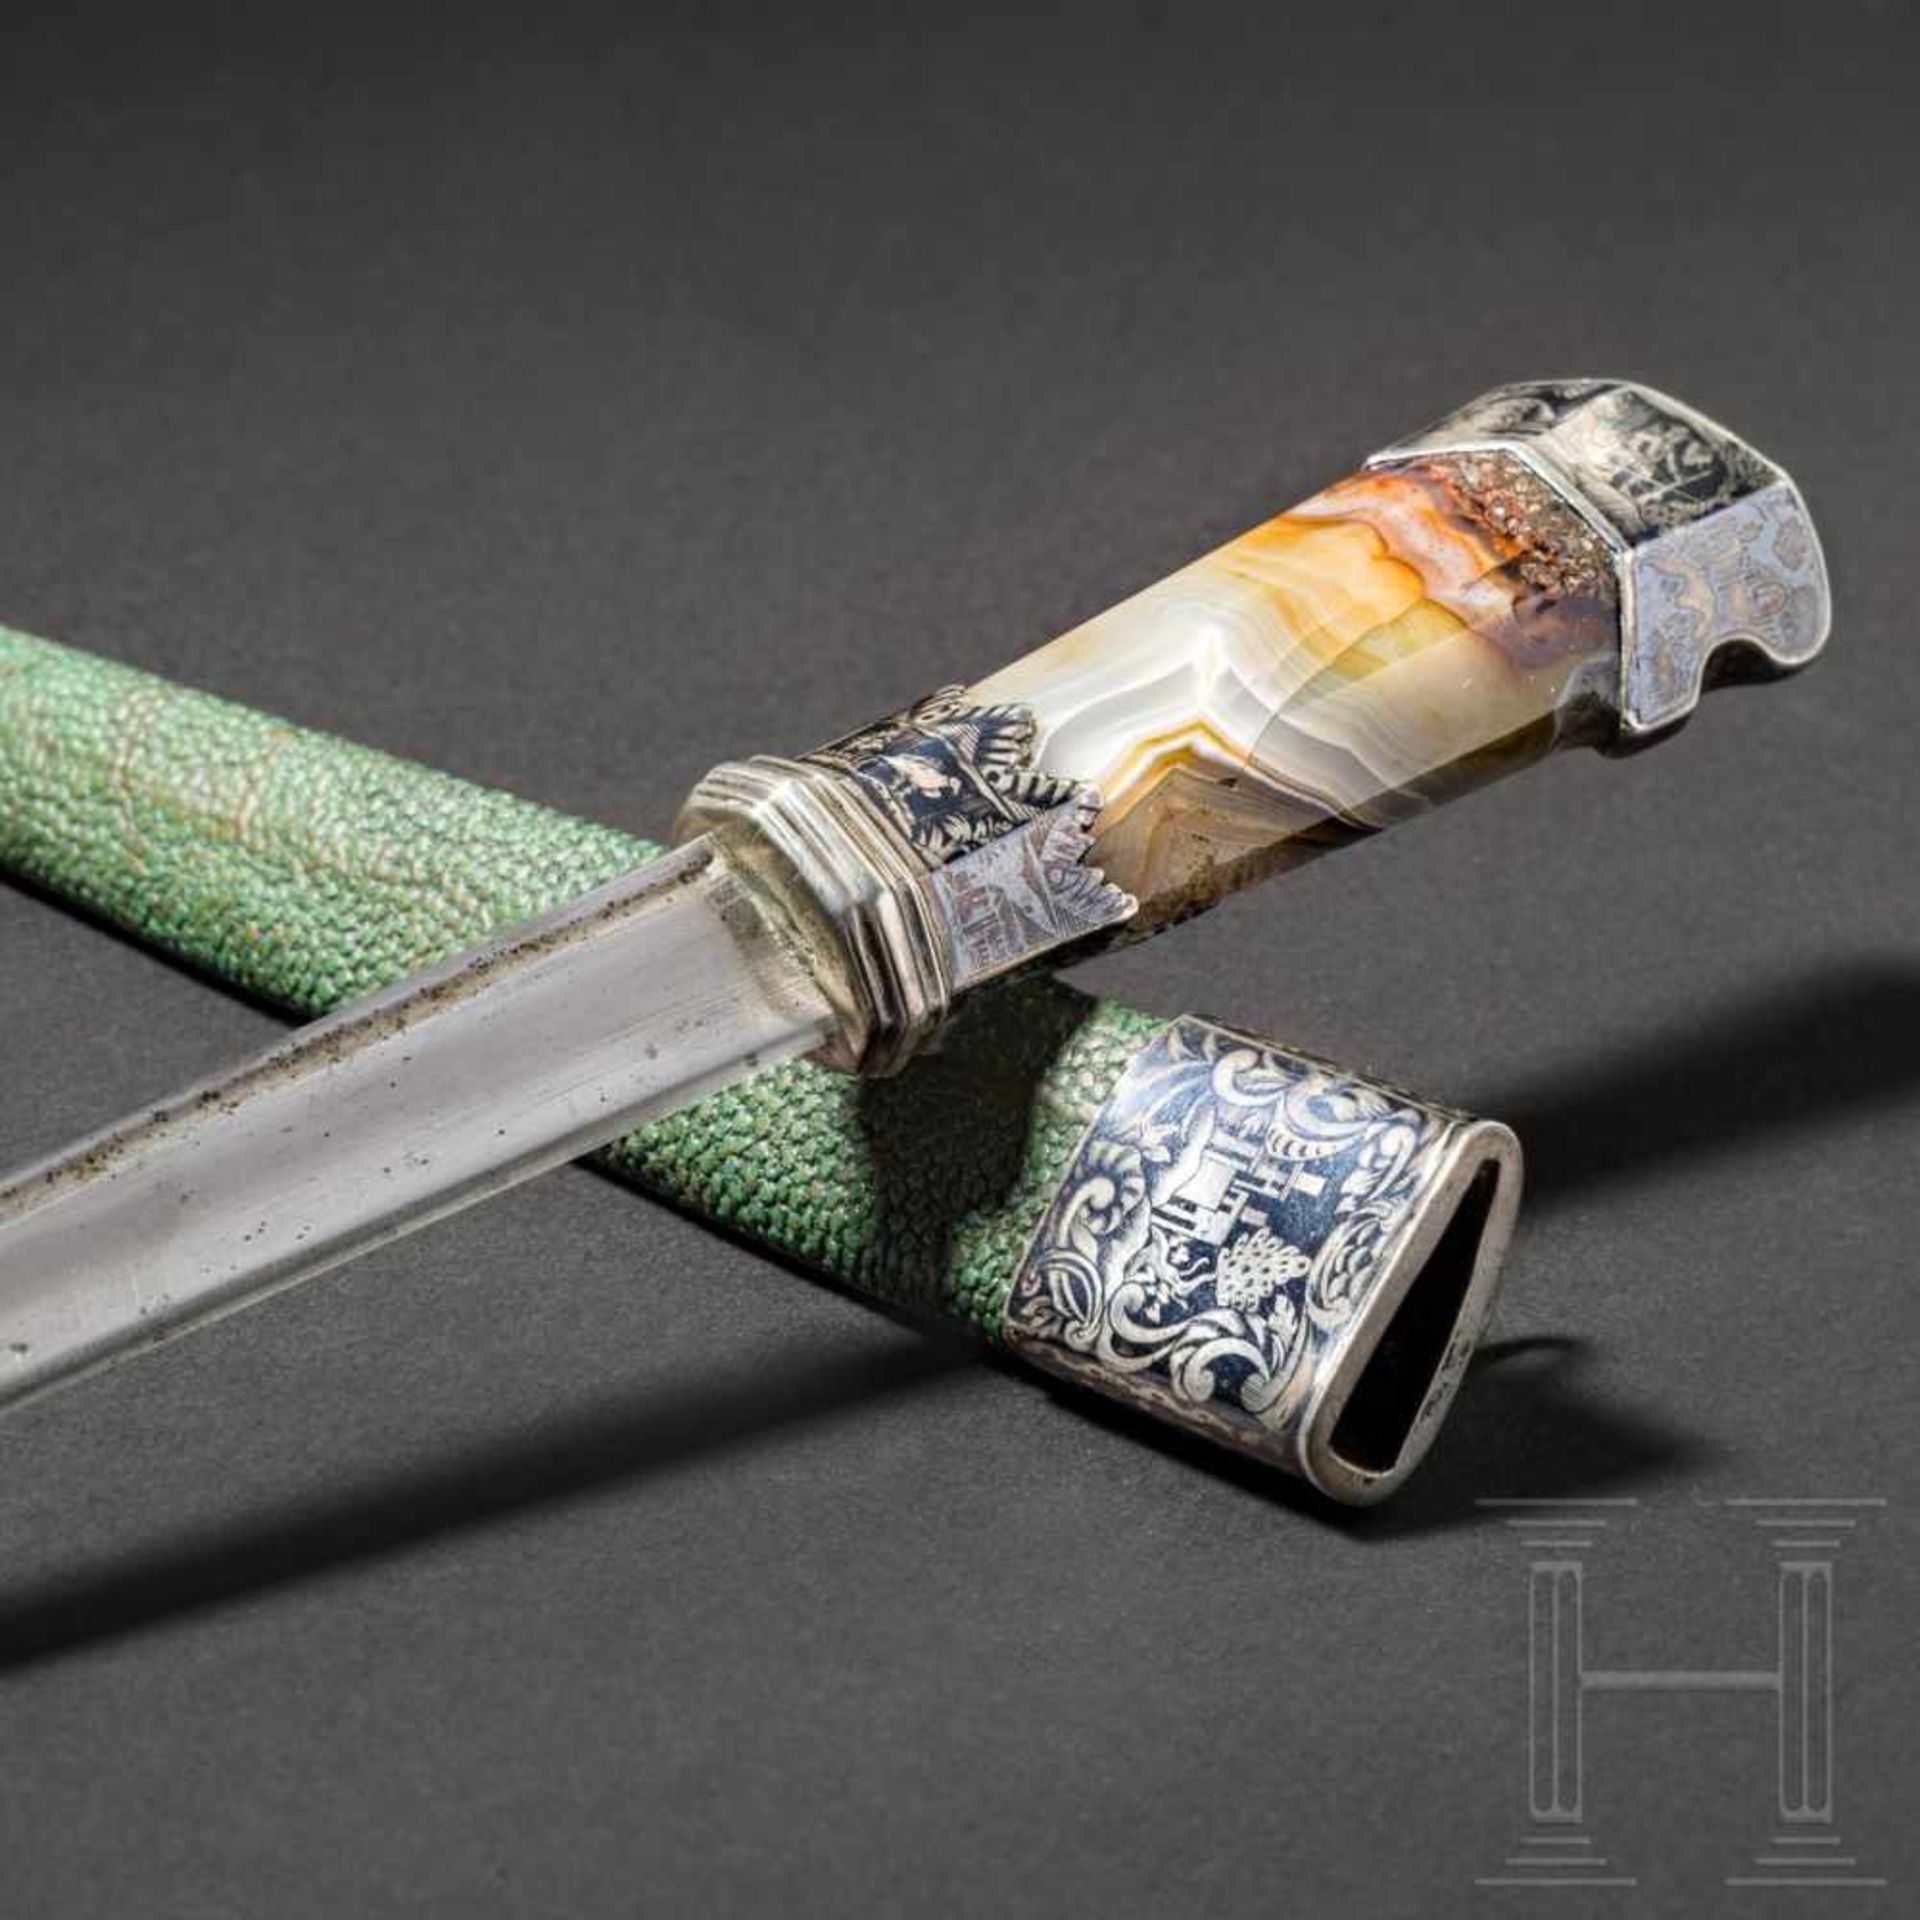 A fine hunting dagger with finely nielloed silver mounts, Tula, 2nd half of 18th centurySlender